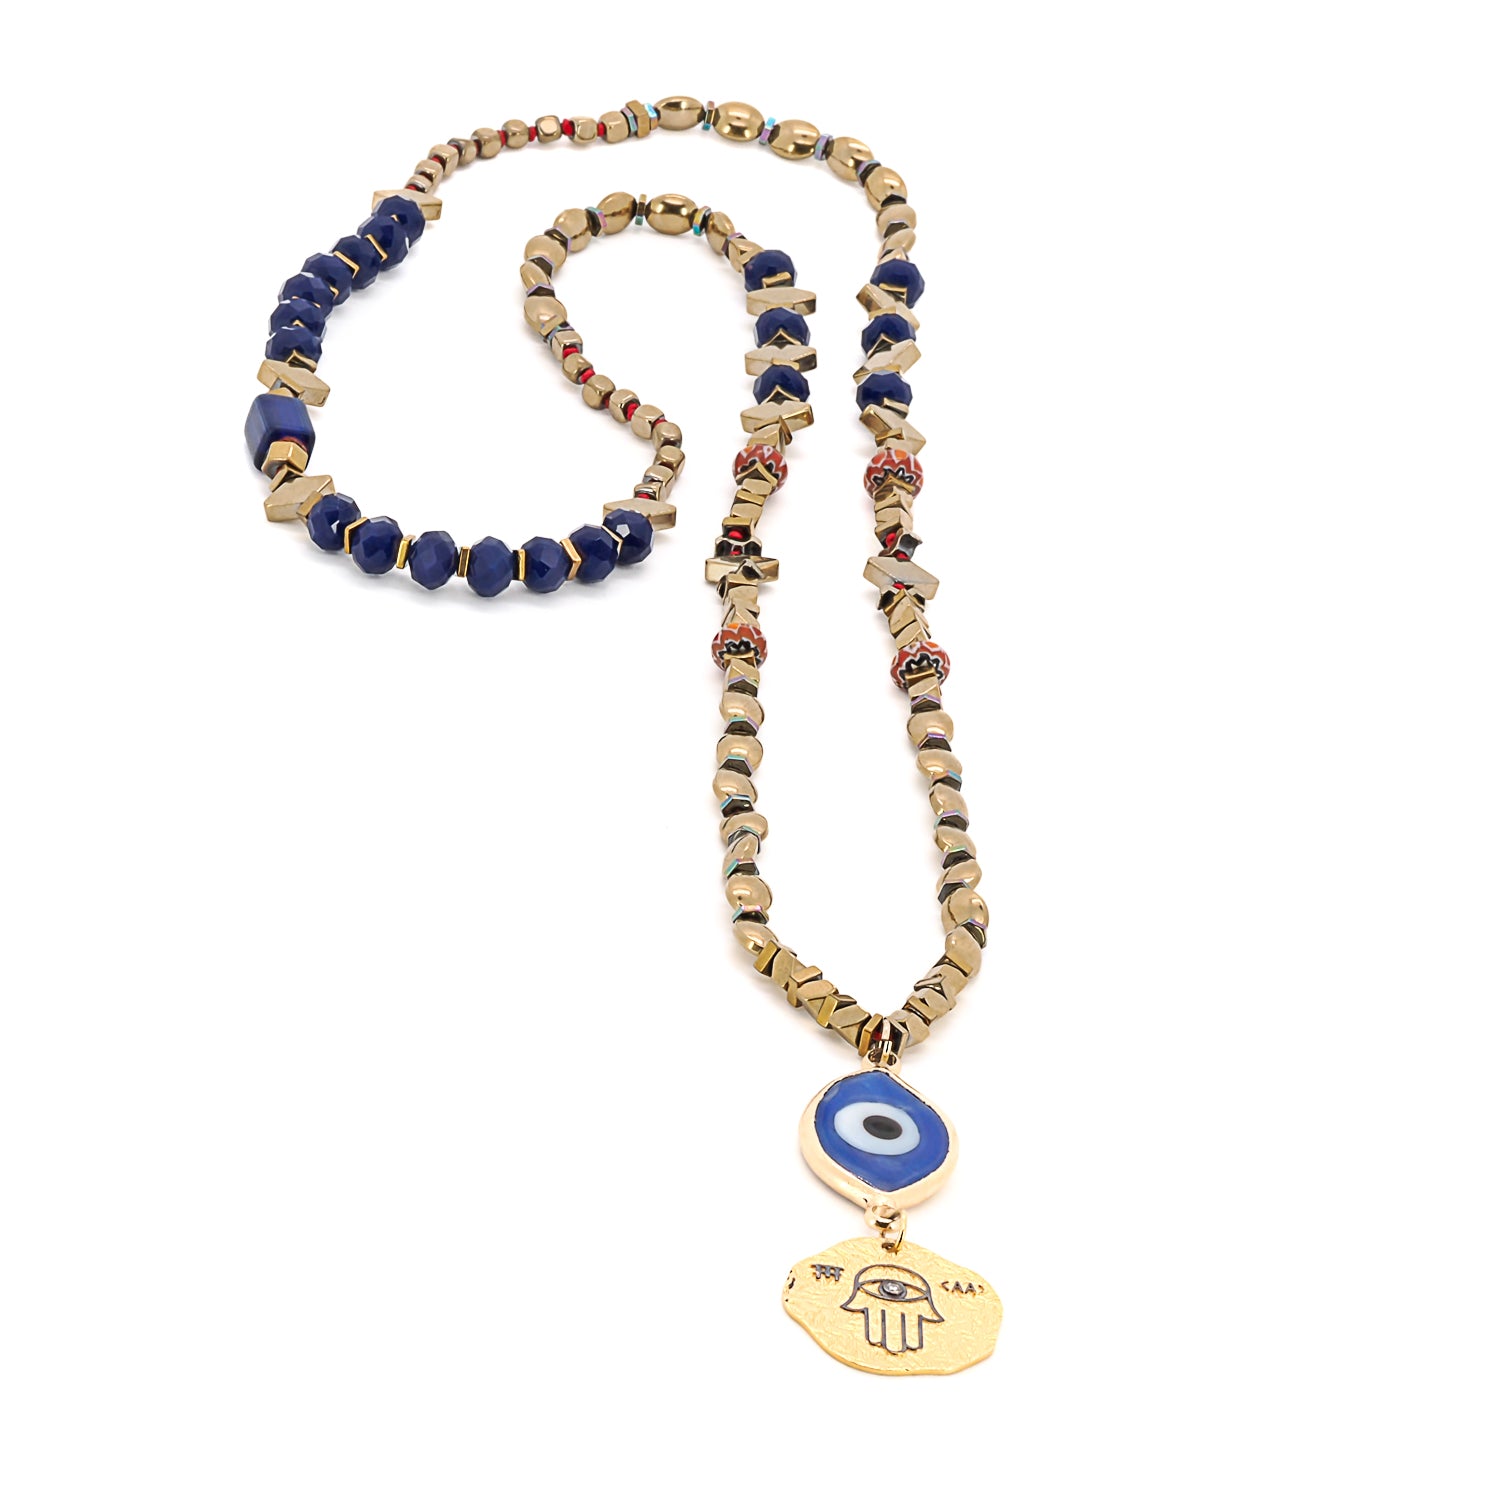 Colorful Ceramic Bead Necklace - A vibrant image featuring the Good Luck Evil Eye and Hamsa Necklace, highlighting the colorful ceramic beads that add a playful and eye-catching element to the necklace.